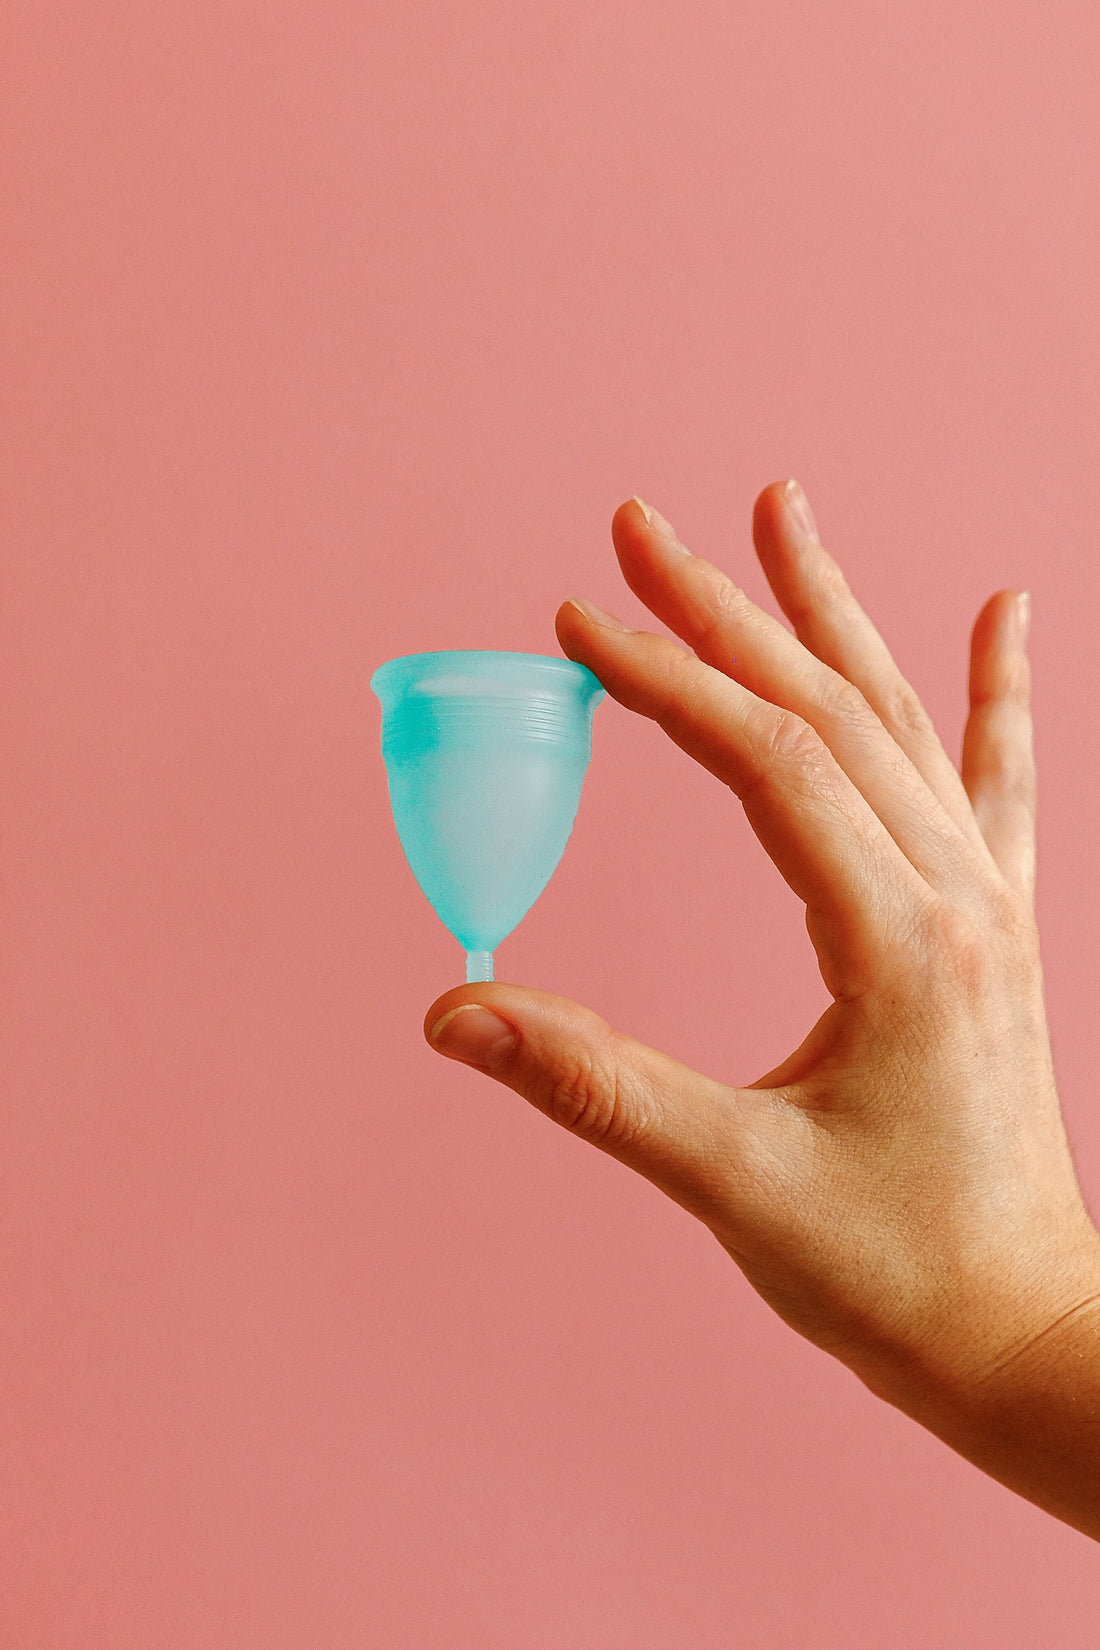 Pros and Cons of the Menstrual Cup – My Experience